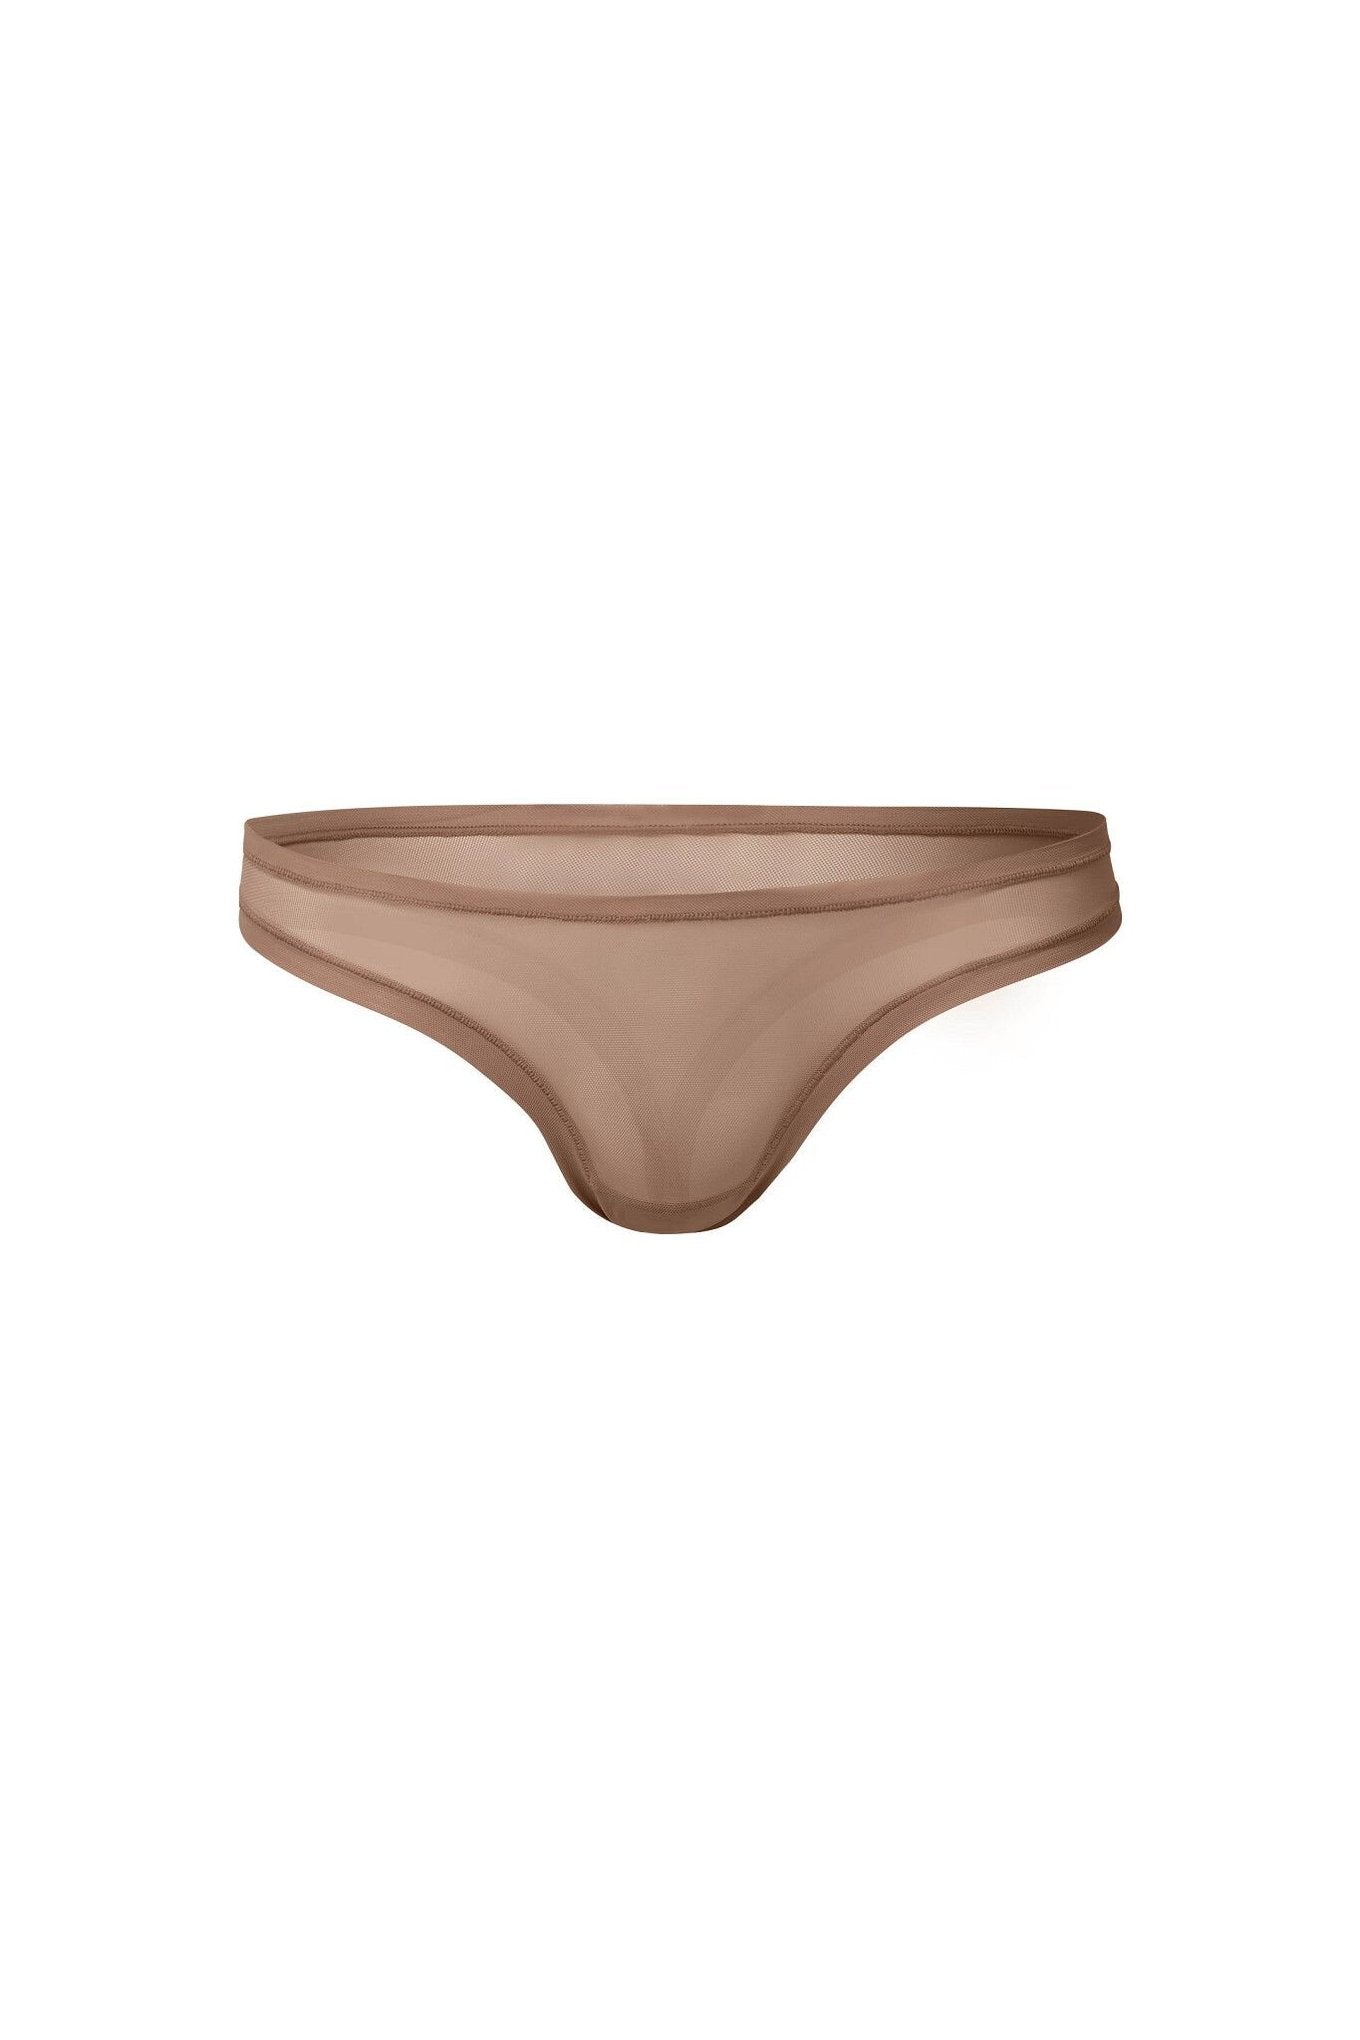 nueskin Bonnie Mesh Low-Rise Thong in color Beaver Fur and shape thong